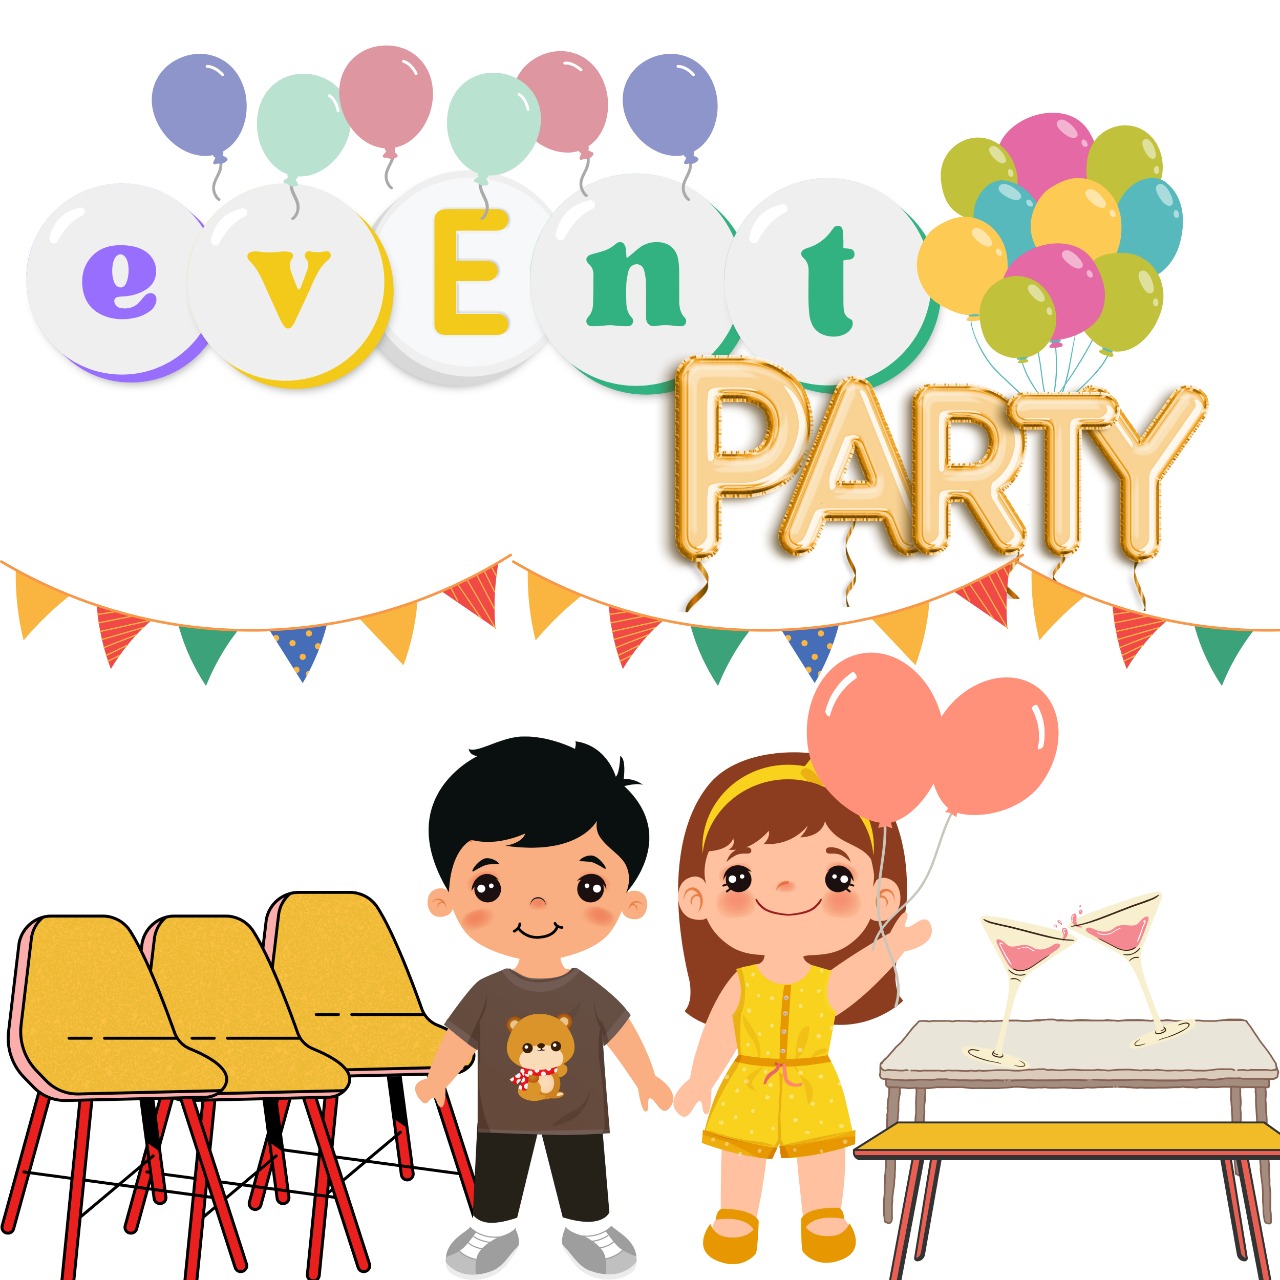 EVENT & PARTY